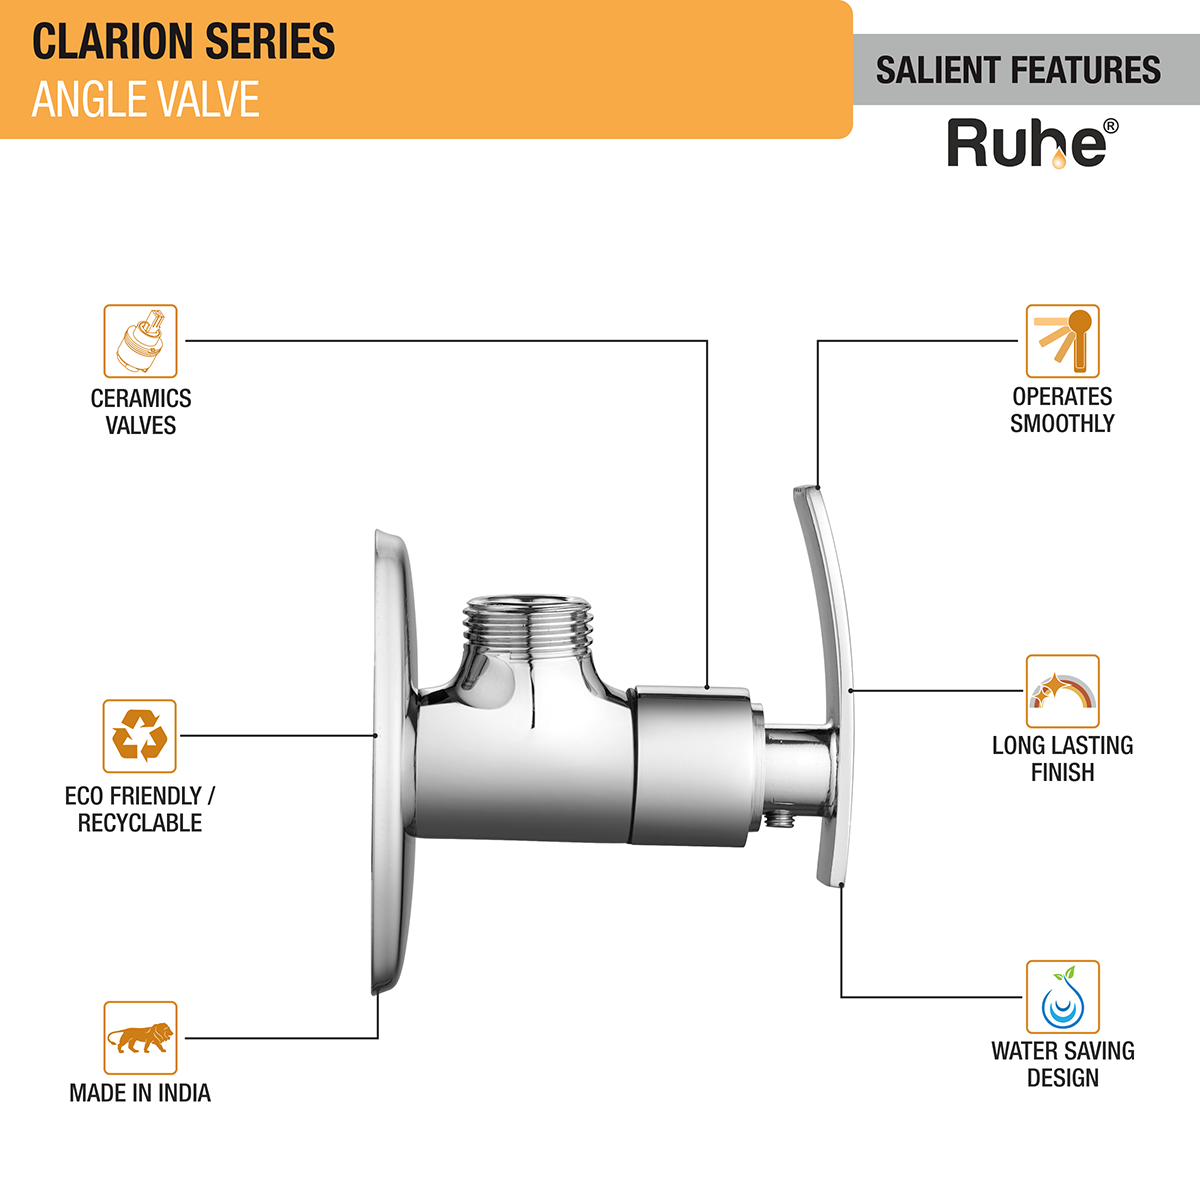 Clarion Angle Valve Brass Faucet features